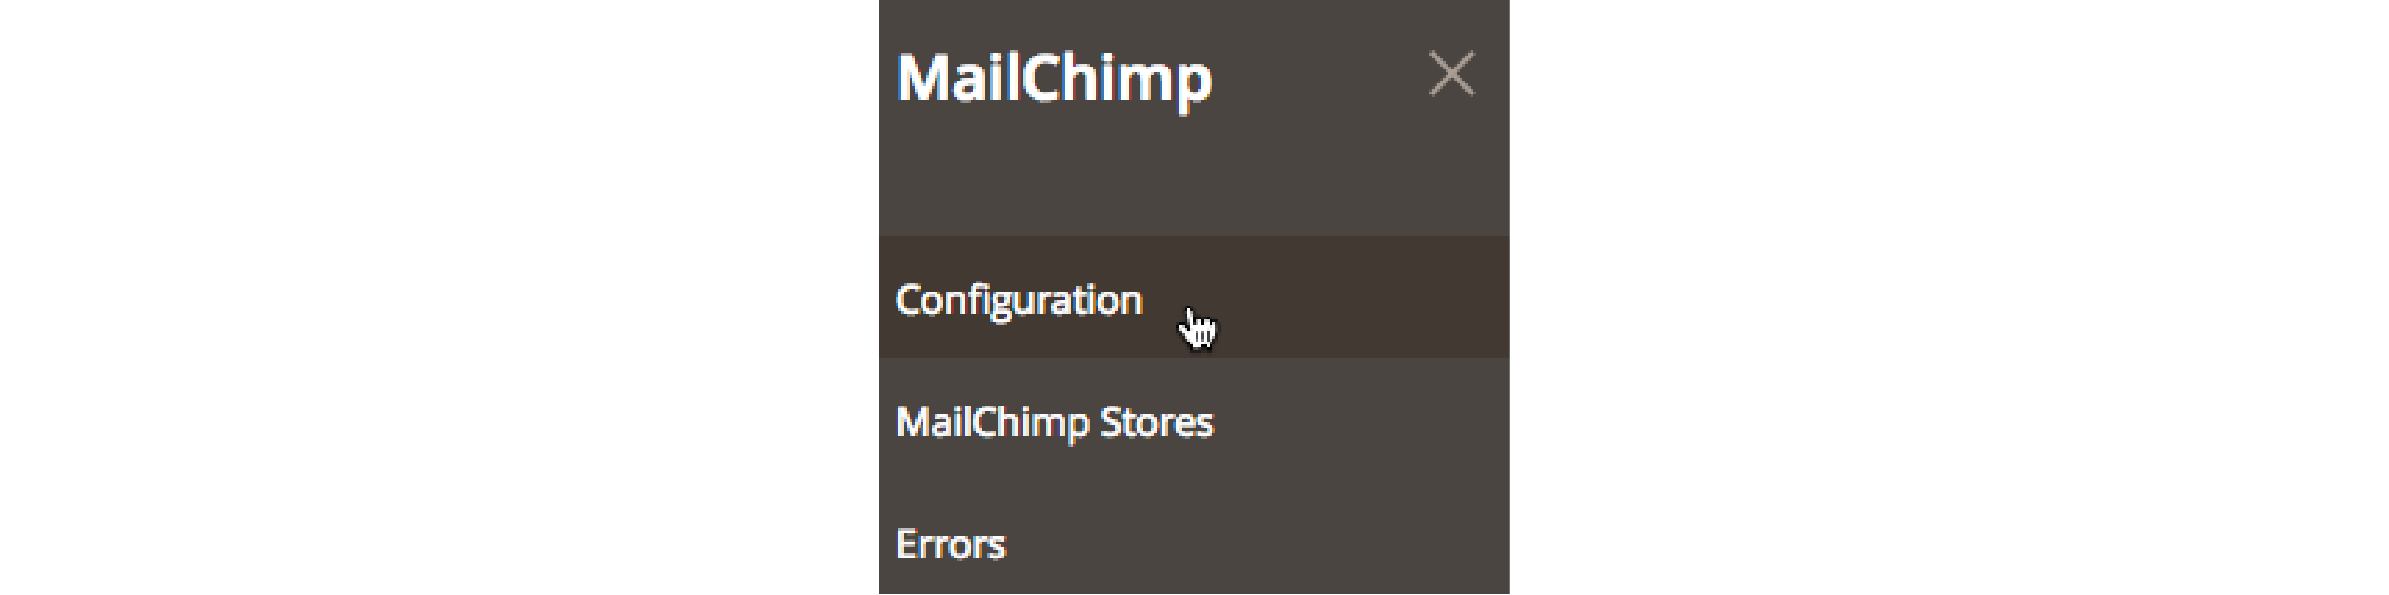 Accessing Mailchimp configuration settings in Magento